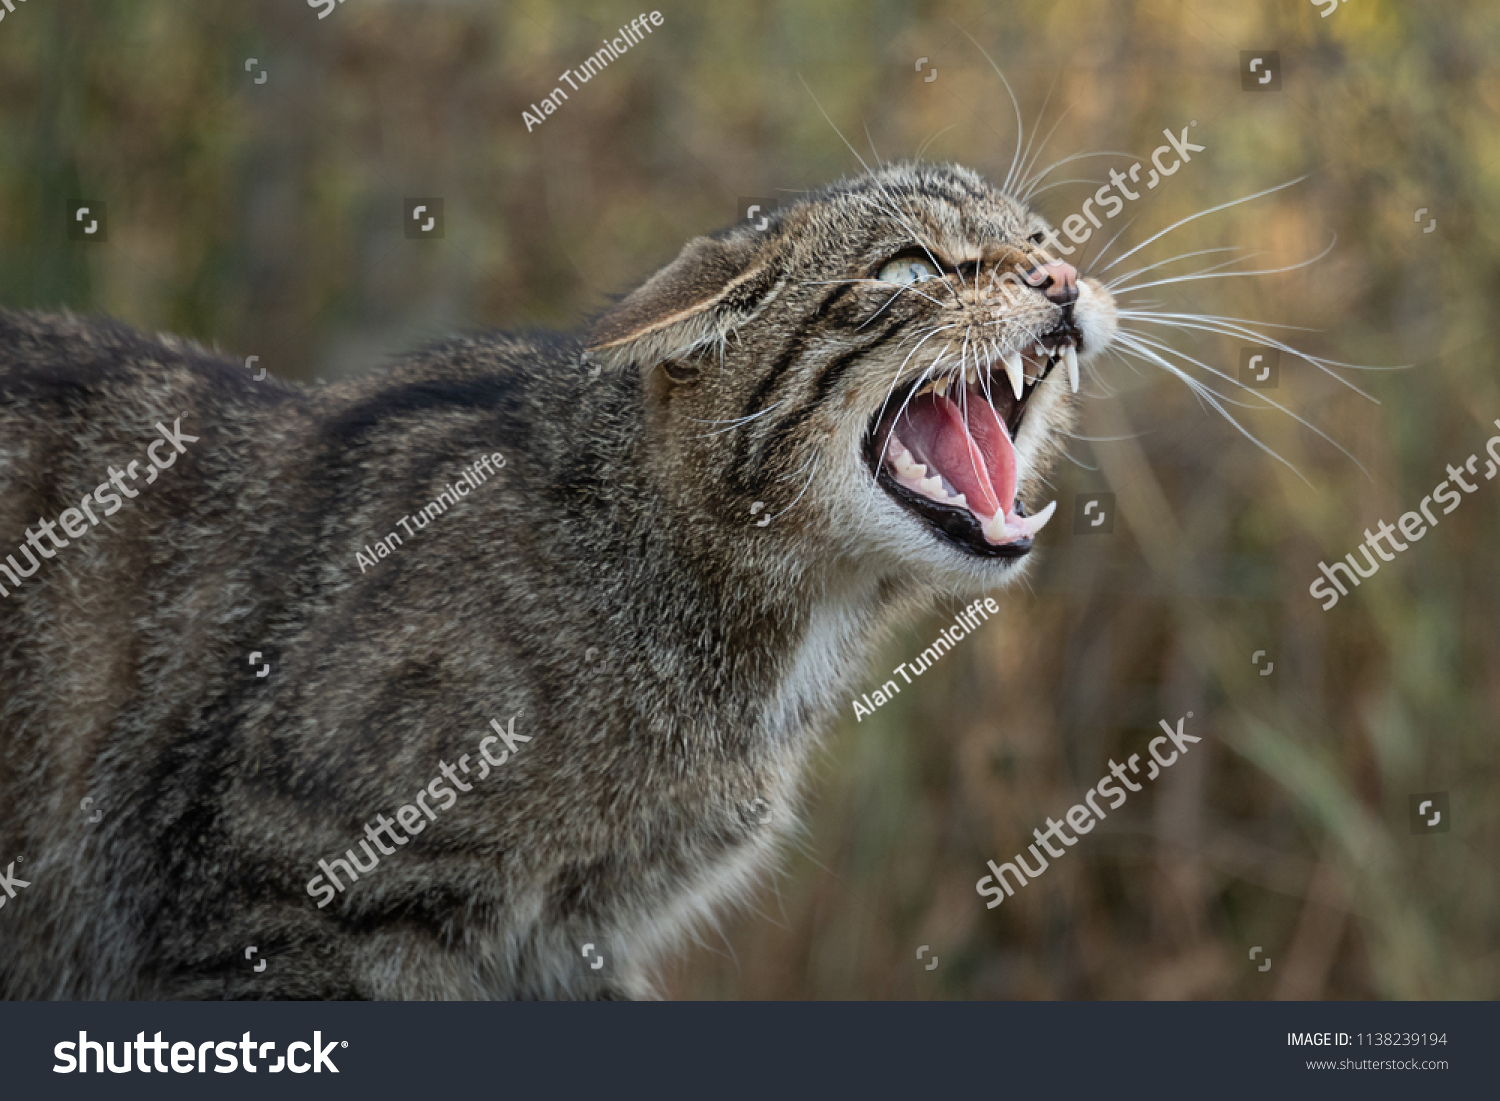 A very close up detailed portrait of a scottish wildcat snarling and showing its teeth facing right #1138239194